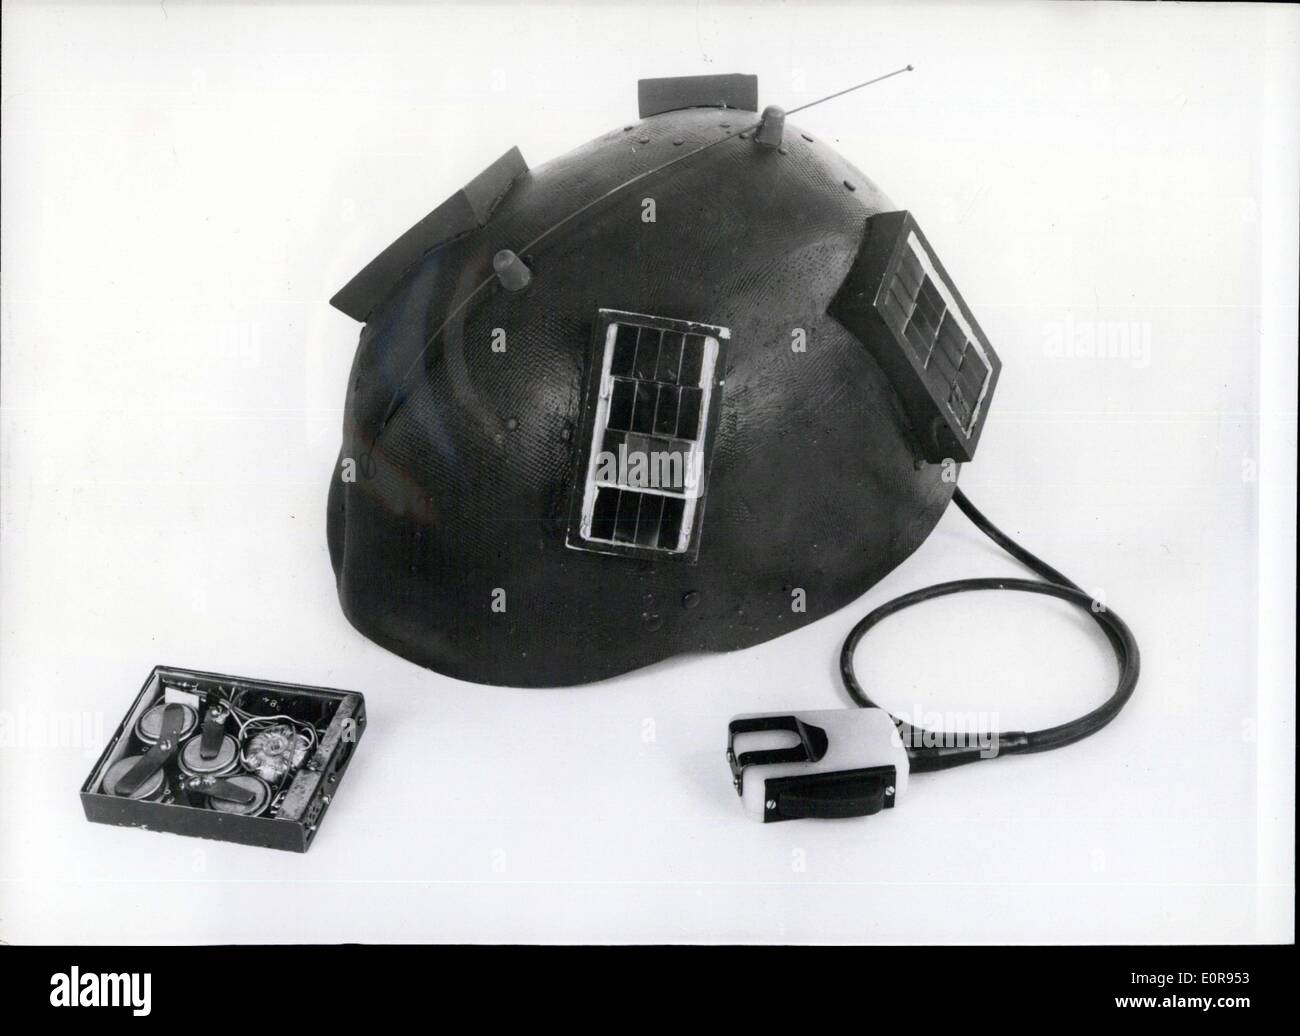 Jul. 12, 1958 - U.S. Helmet Radio designed to use the sun's rays to obtain electric power needed. The U.S. helmet radio currently being developed by the U.S. Army Signal Corps, is deisgned to use the sun's rays to obtain all electric power needed to operate both the transmitter and receiver for as long as a year. Long narrow clusters of tiny solar cells are paced on either side of the crown of the helmet. These silicon wafers power the radio fro normal daylight operation and charge four small nickelcadium storage batteries to supply peak current in daytime and operate the set at night Stock Photo